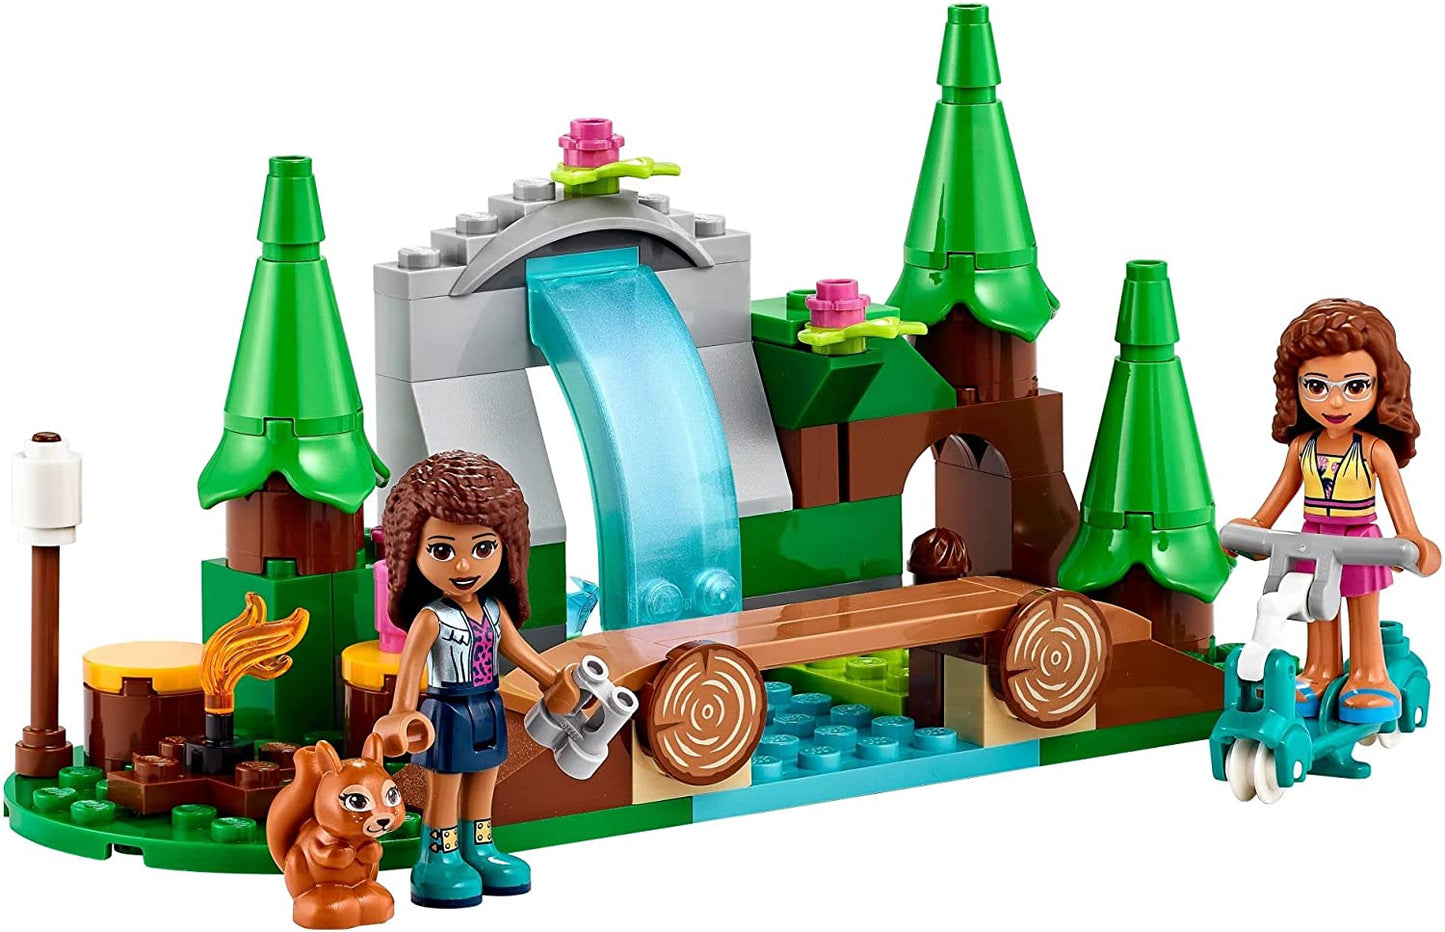 LEGO Friends Forest Waterfall 93 pieces (41677)